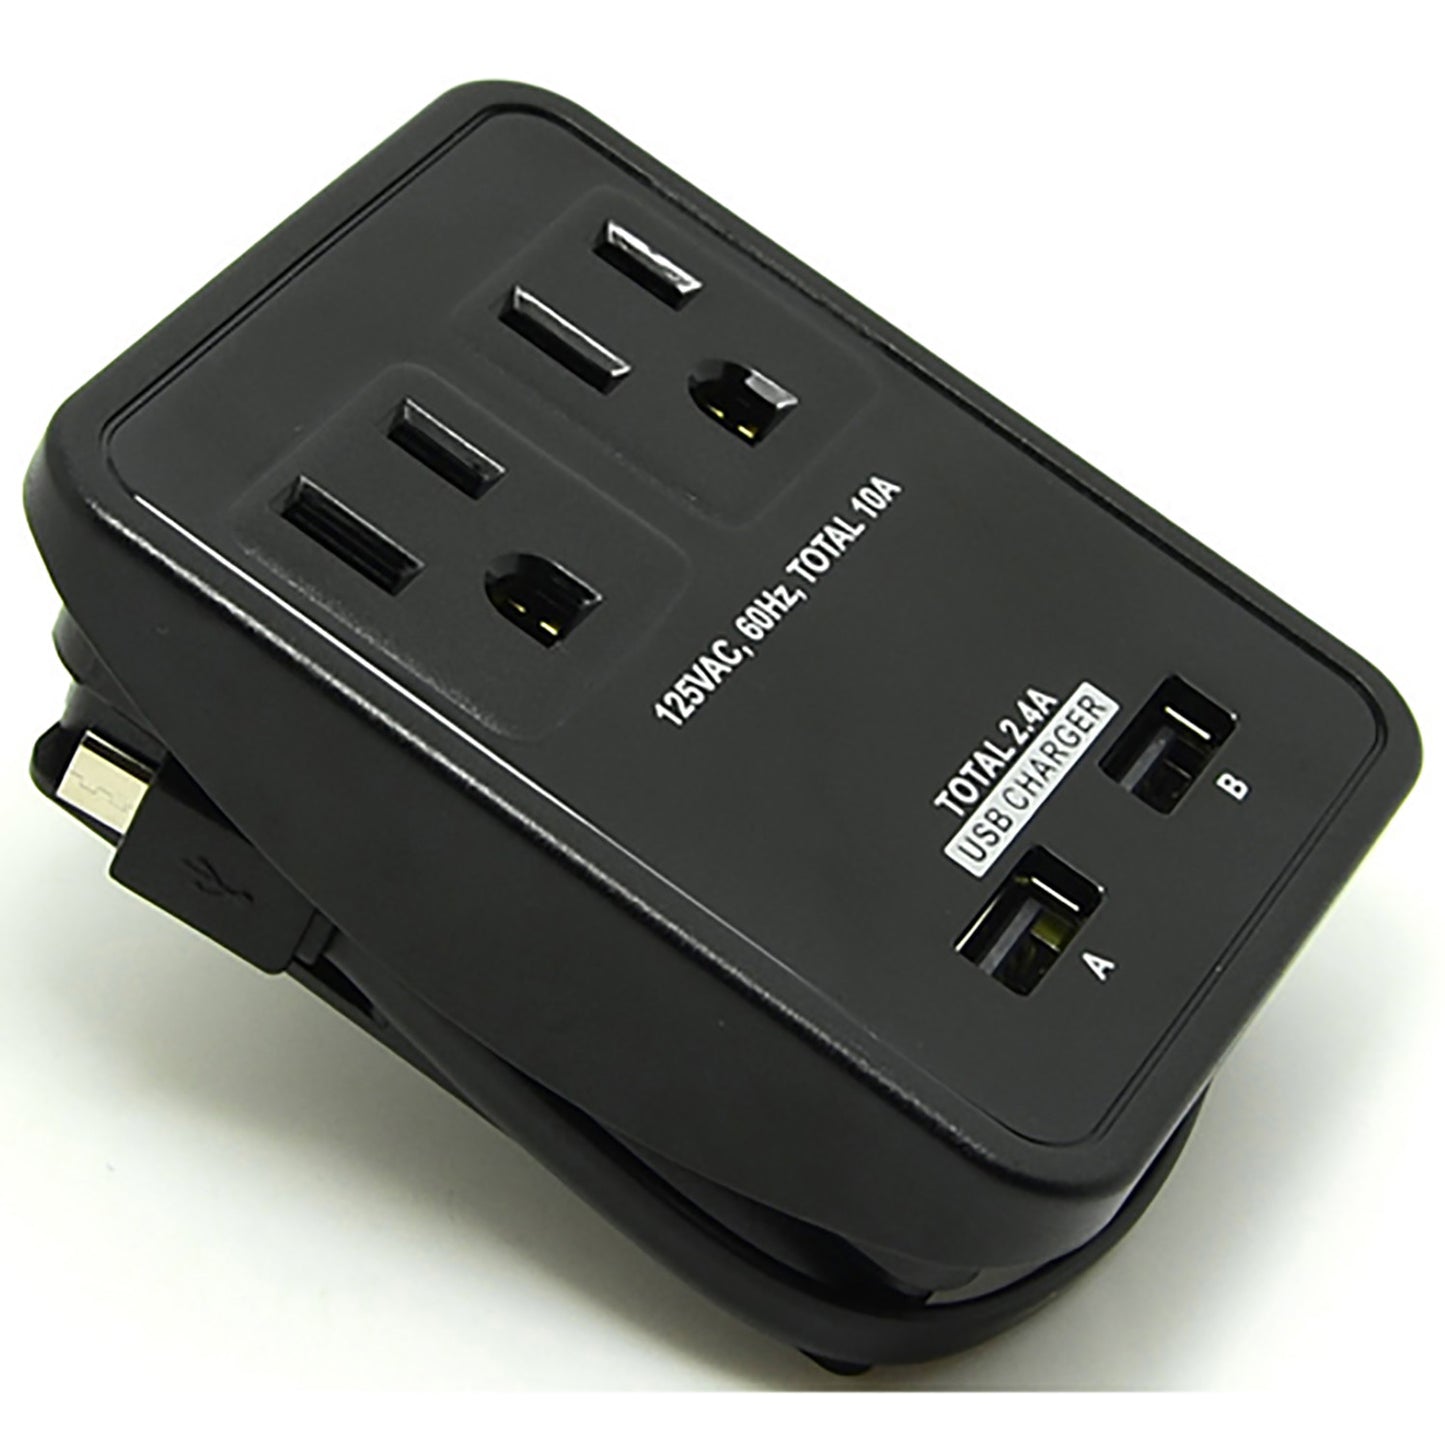 Compact Power Station 2.4 Amp Dual USB Ports, 2 AC Outlet Wall Charger with an attached 7 inch Micro USB cable by RND - RND Power Solutions - 2